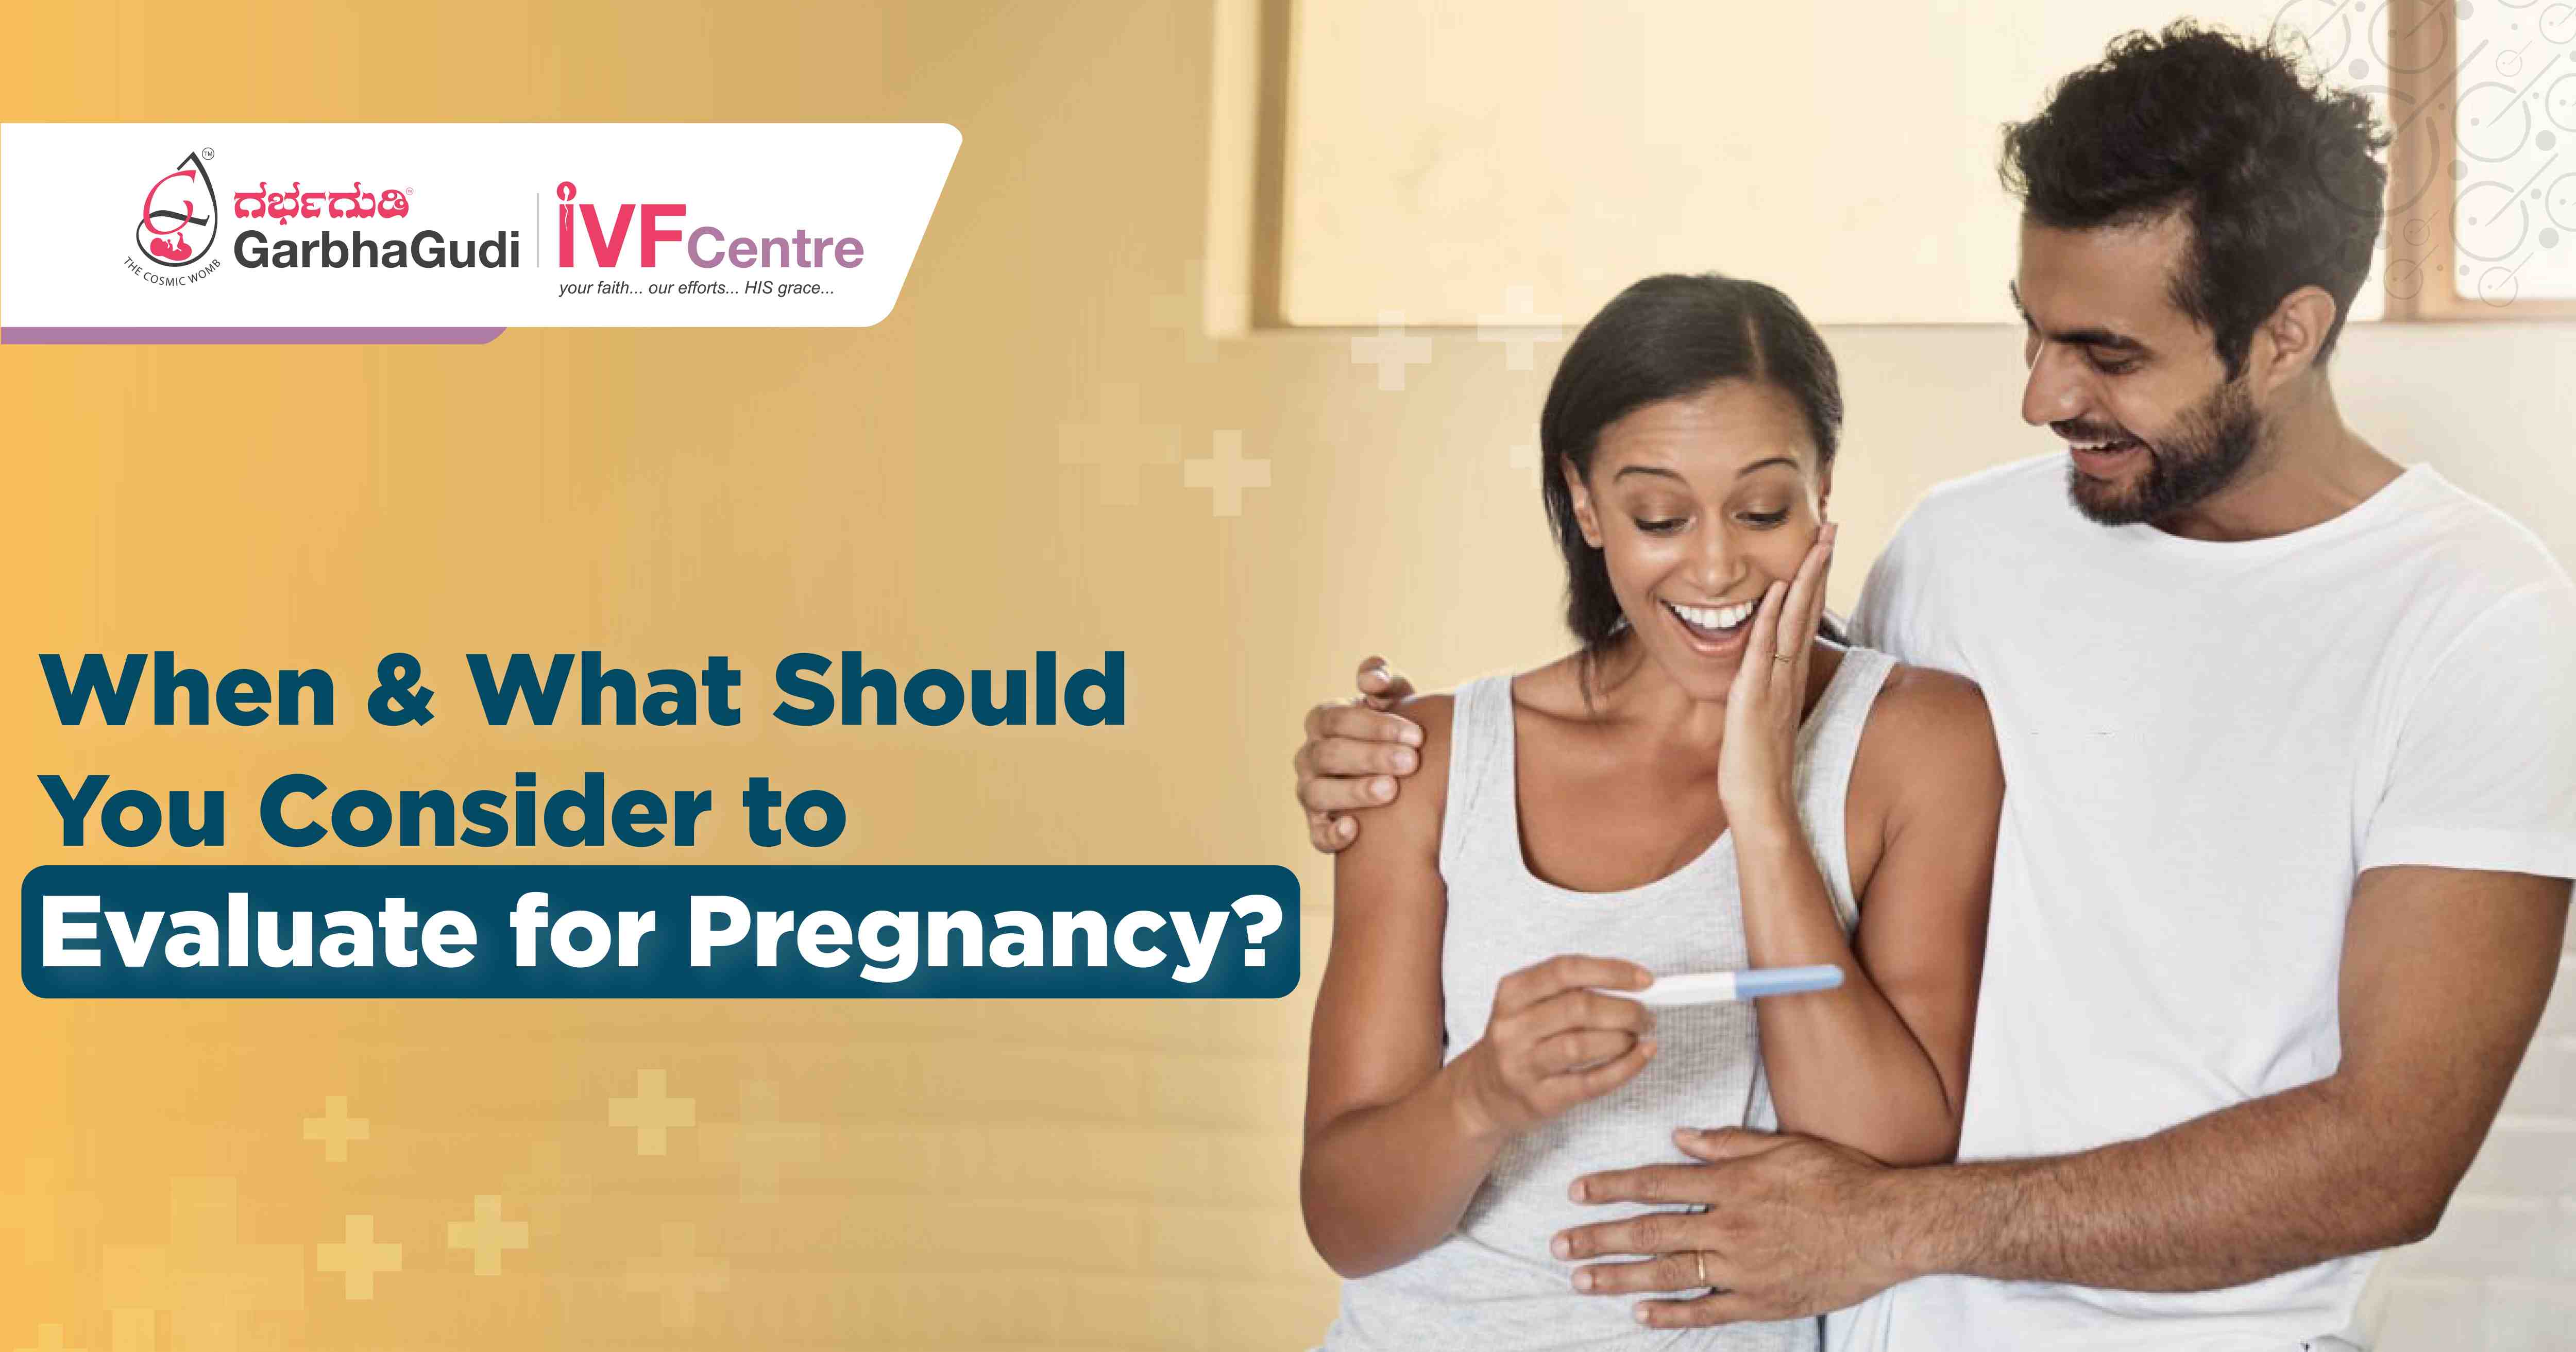 When & What Should You Consider to Evaluate for Pregnancy?